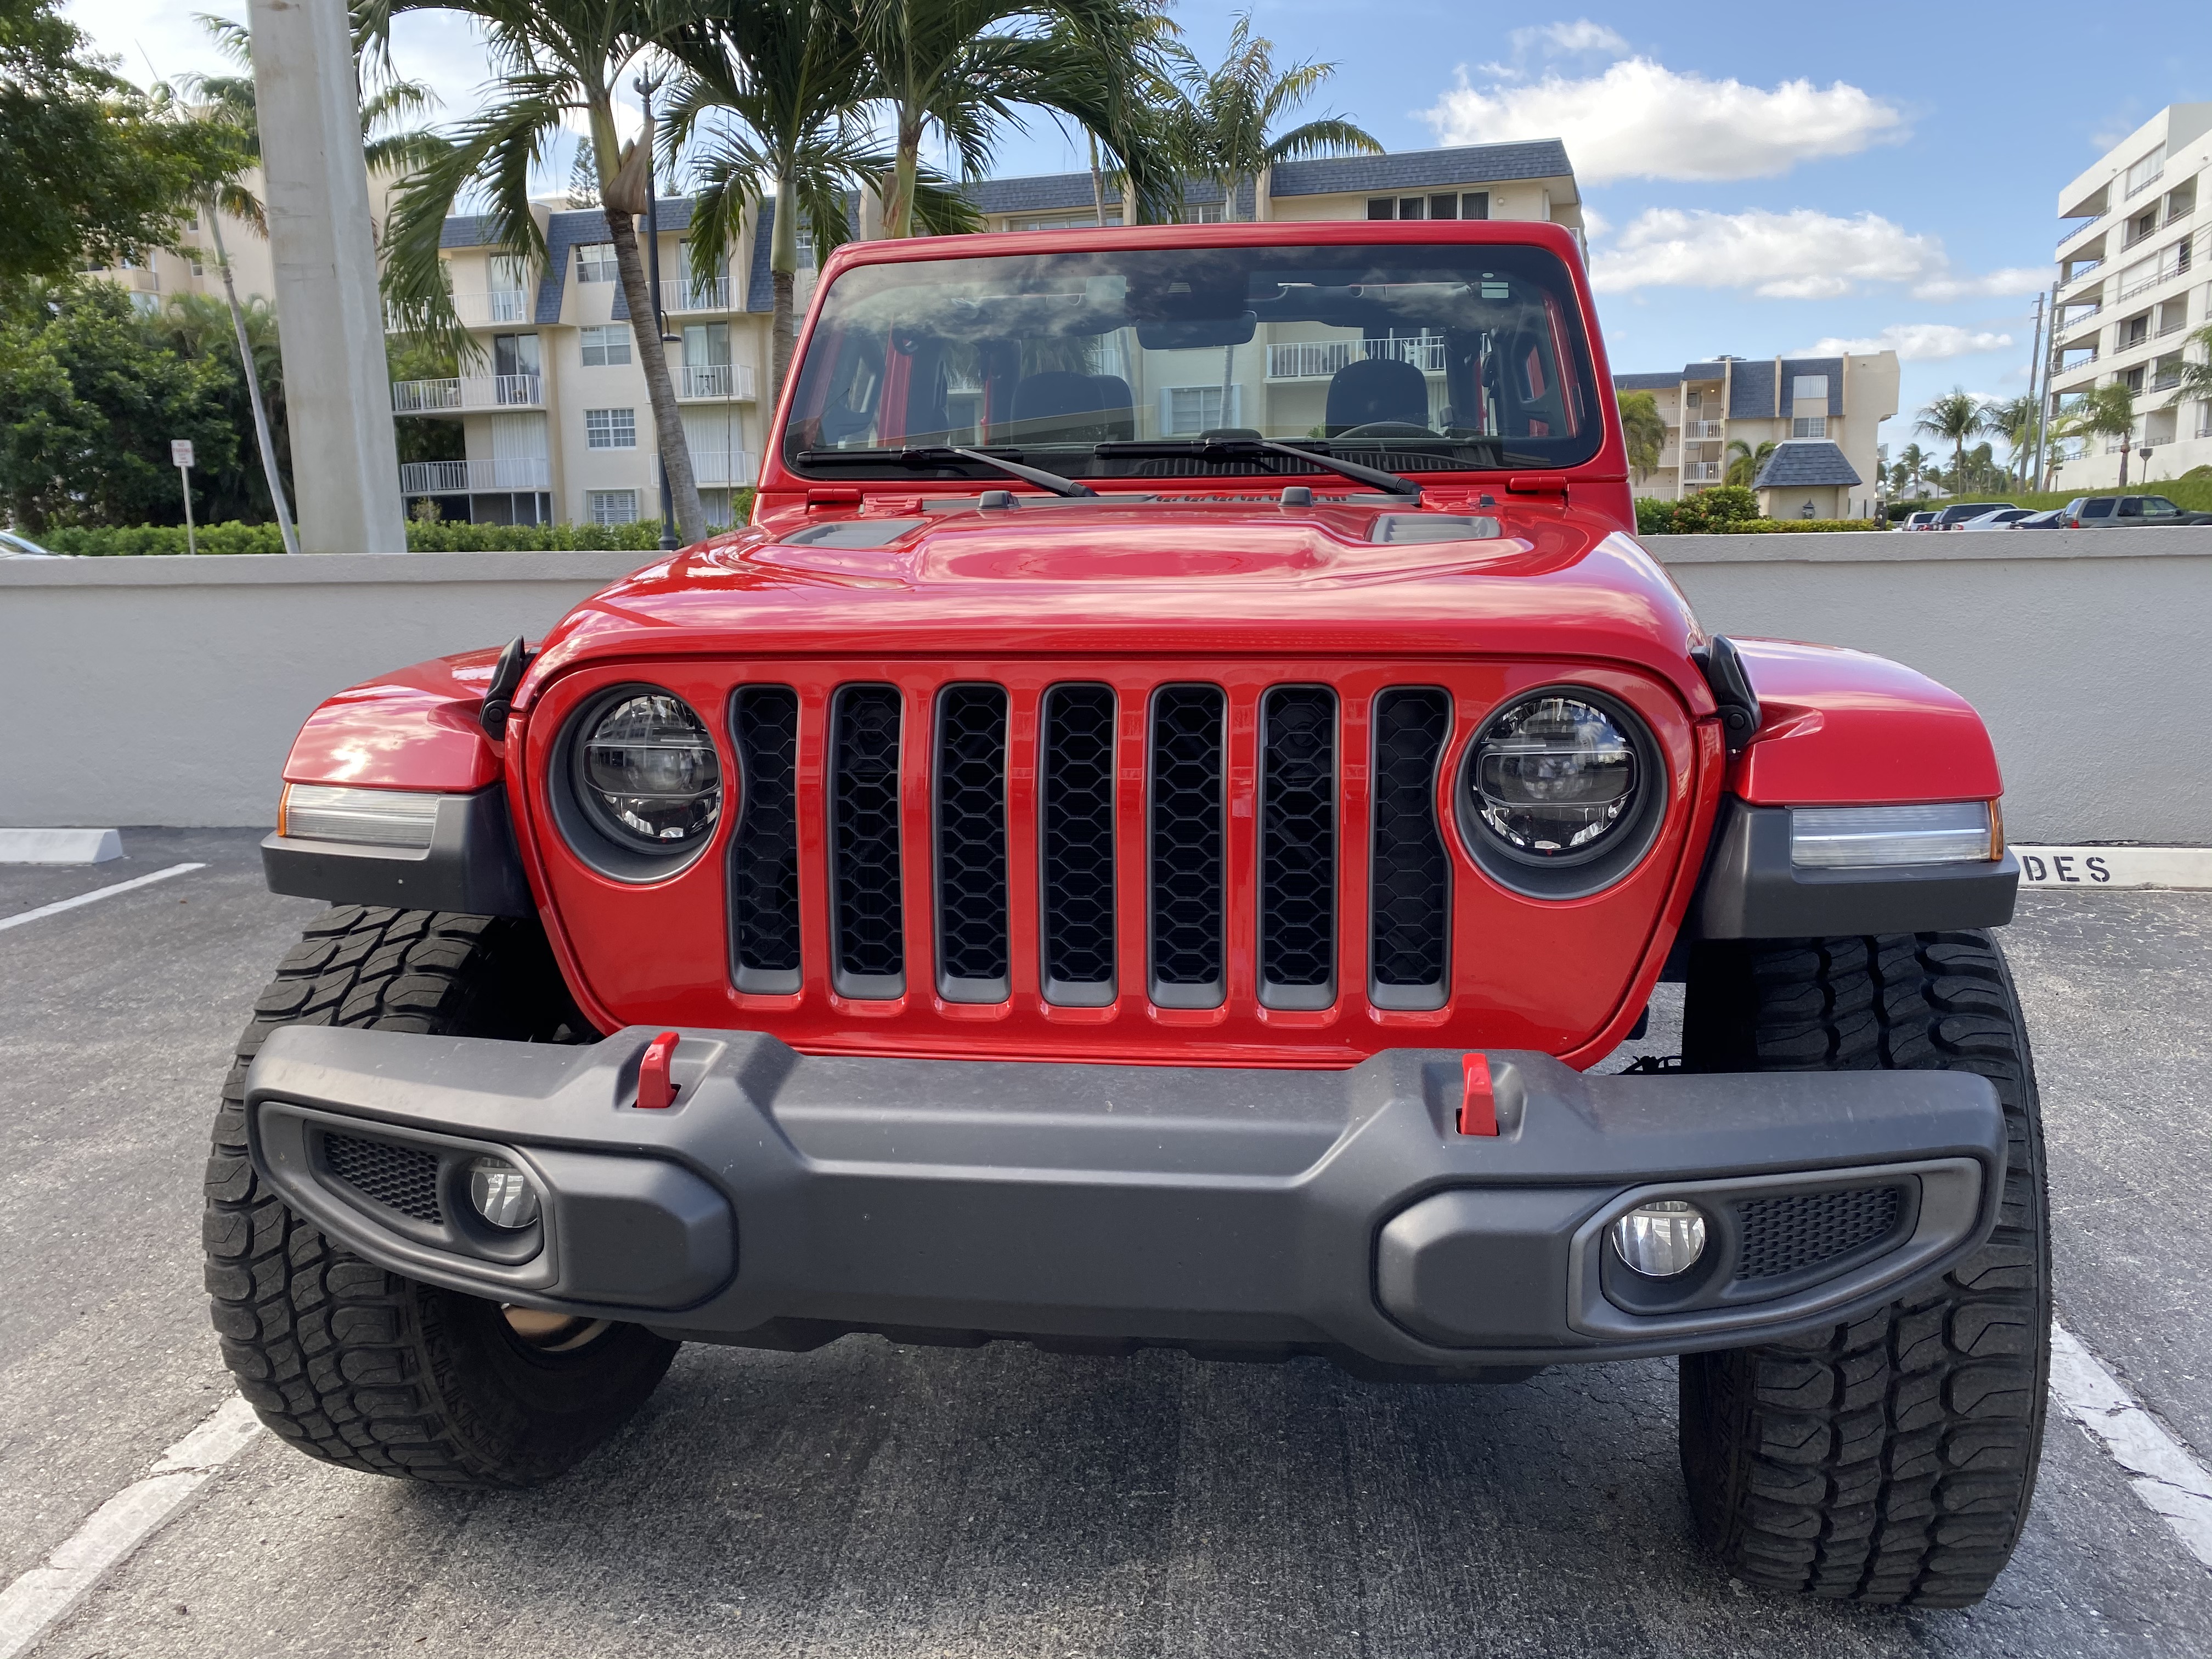 Jeep Gladiator (JT) Rubicon in red - topless and doorless - 2of6.jpg. 